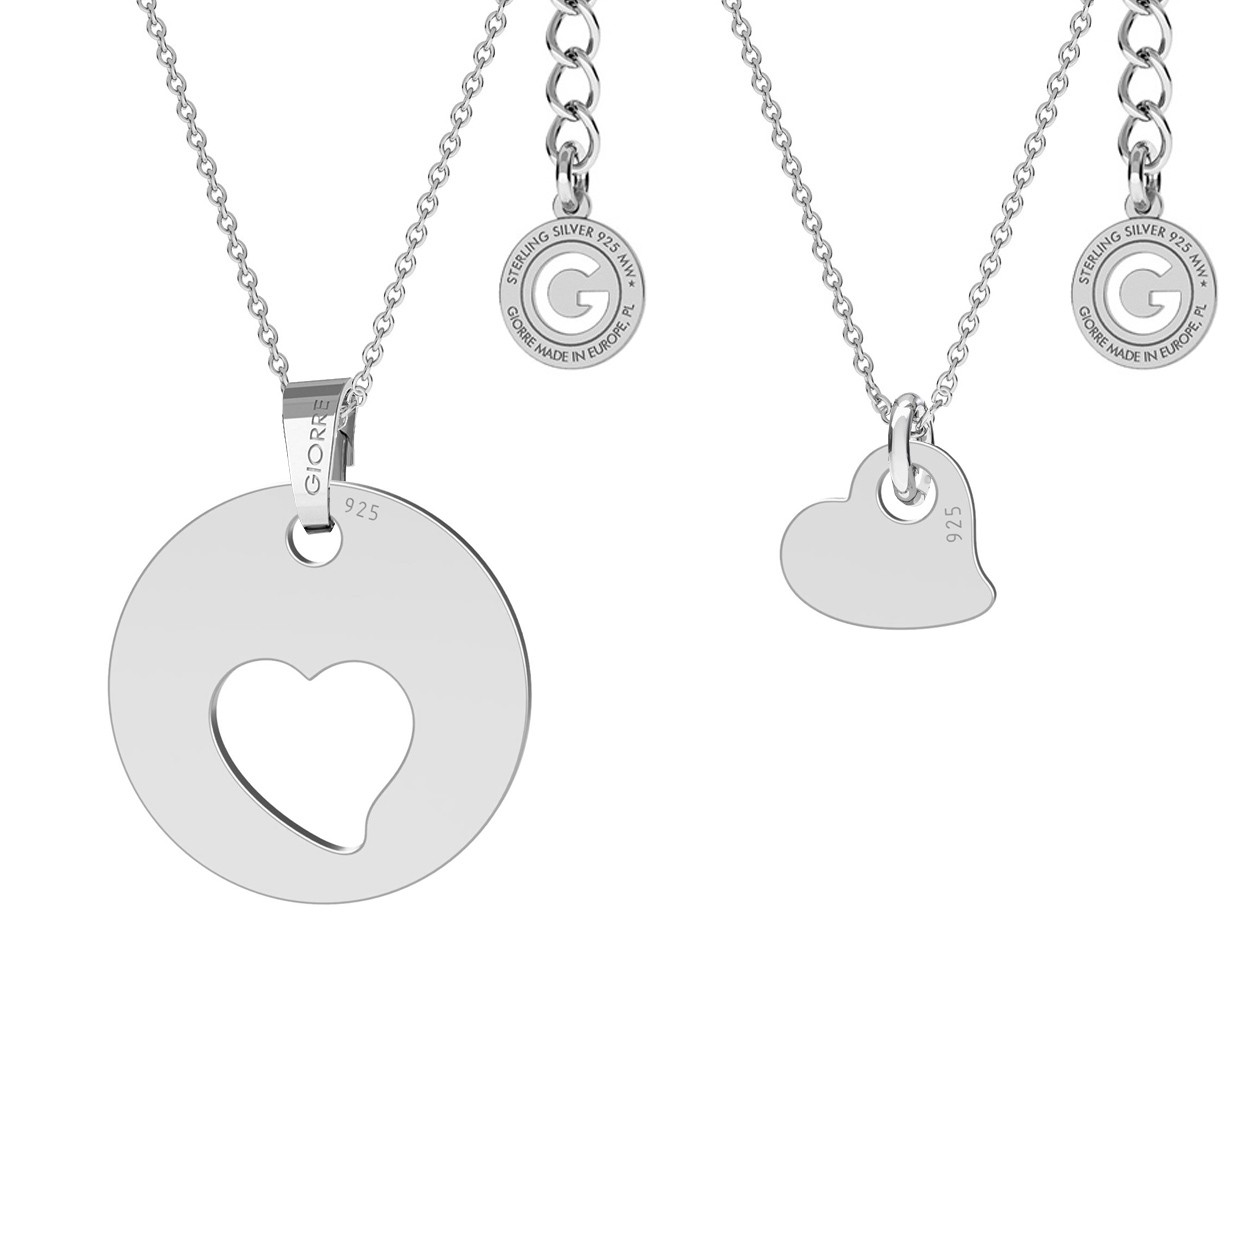 Locket pendant necklace, engraved & foto, black onyx stone, sterling silver  925 Store GIORRE